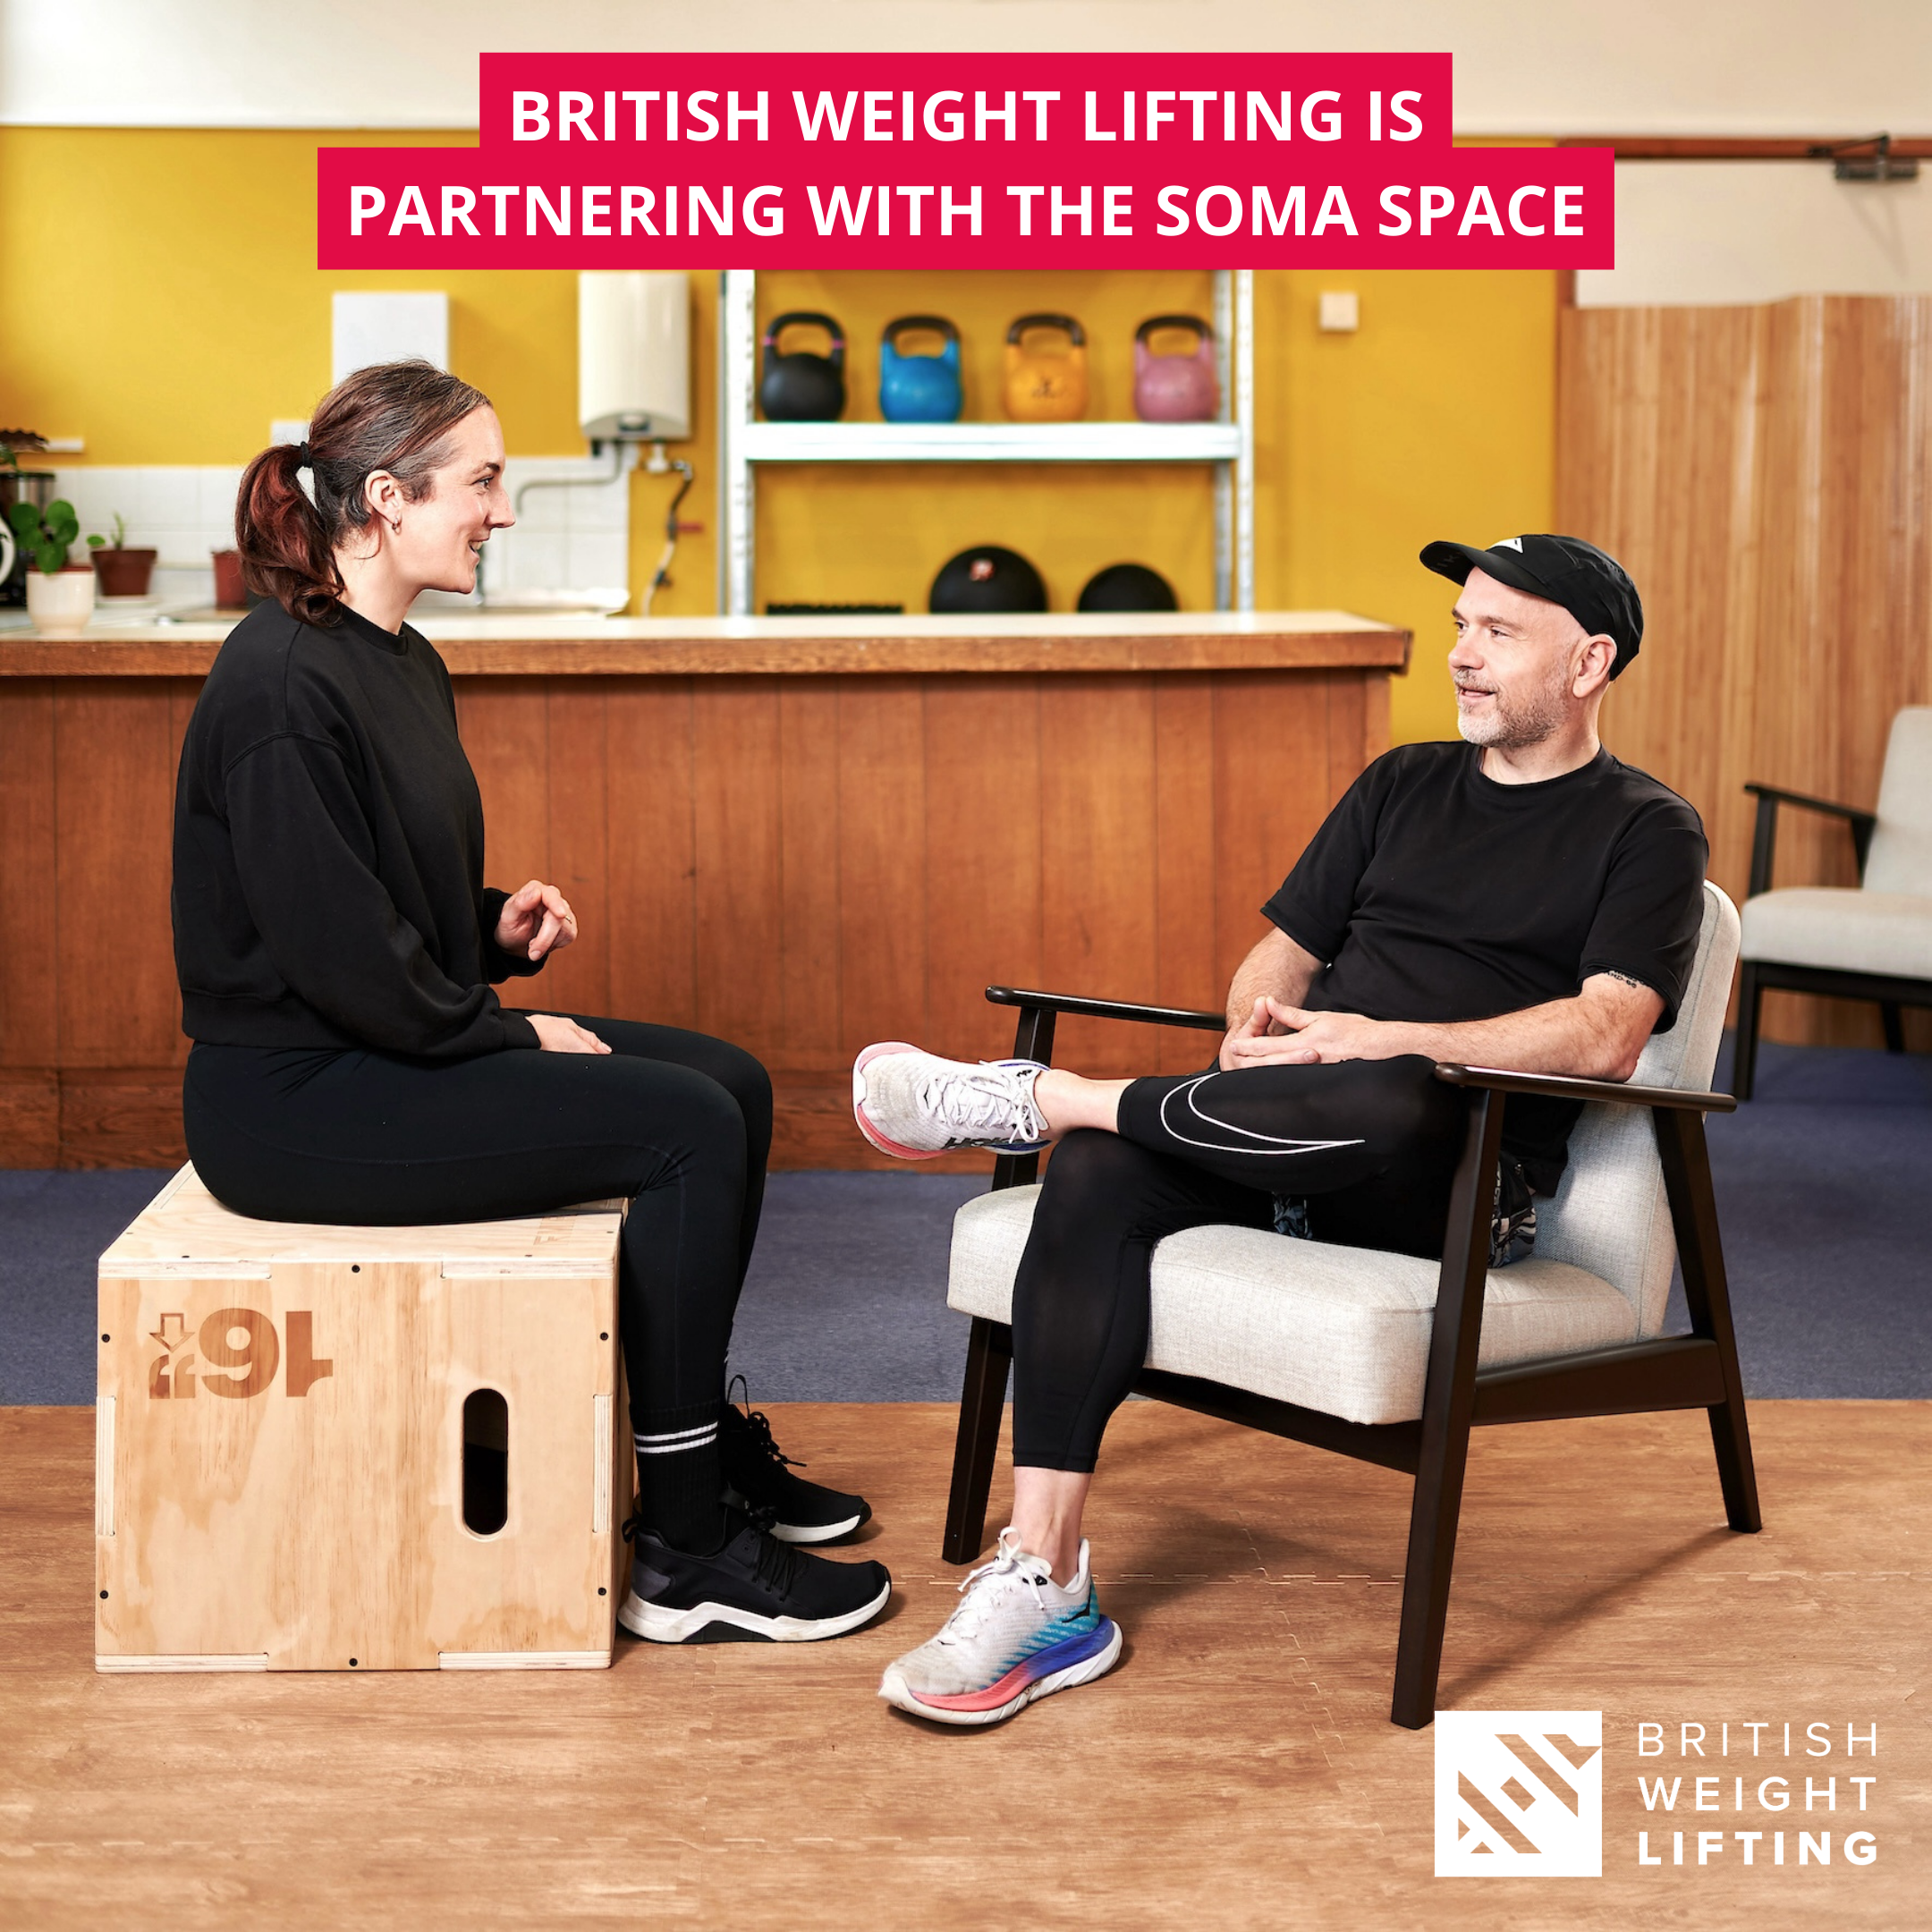 British Weight Lifting and The Soma Space - Movement for Mental Health